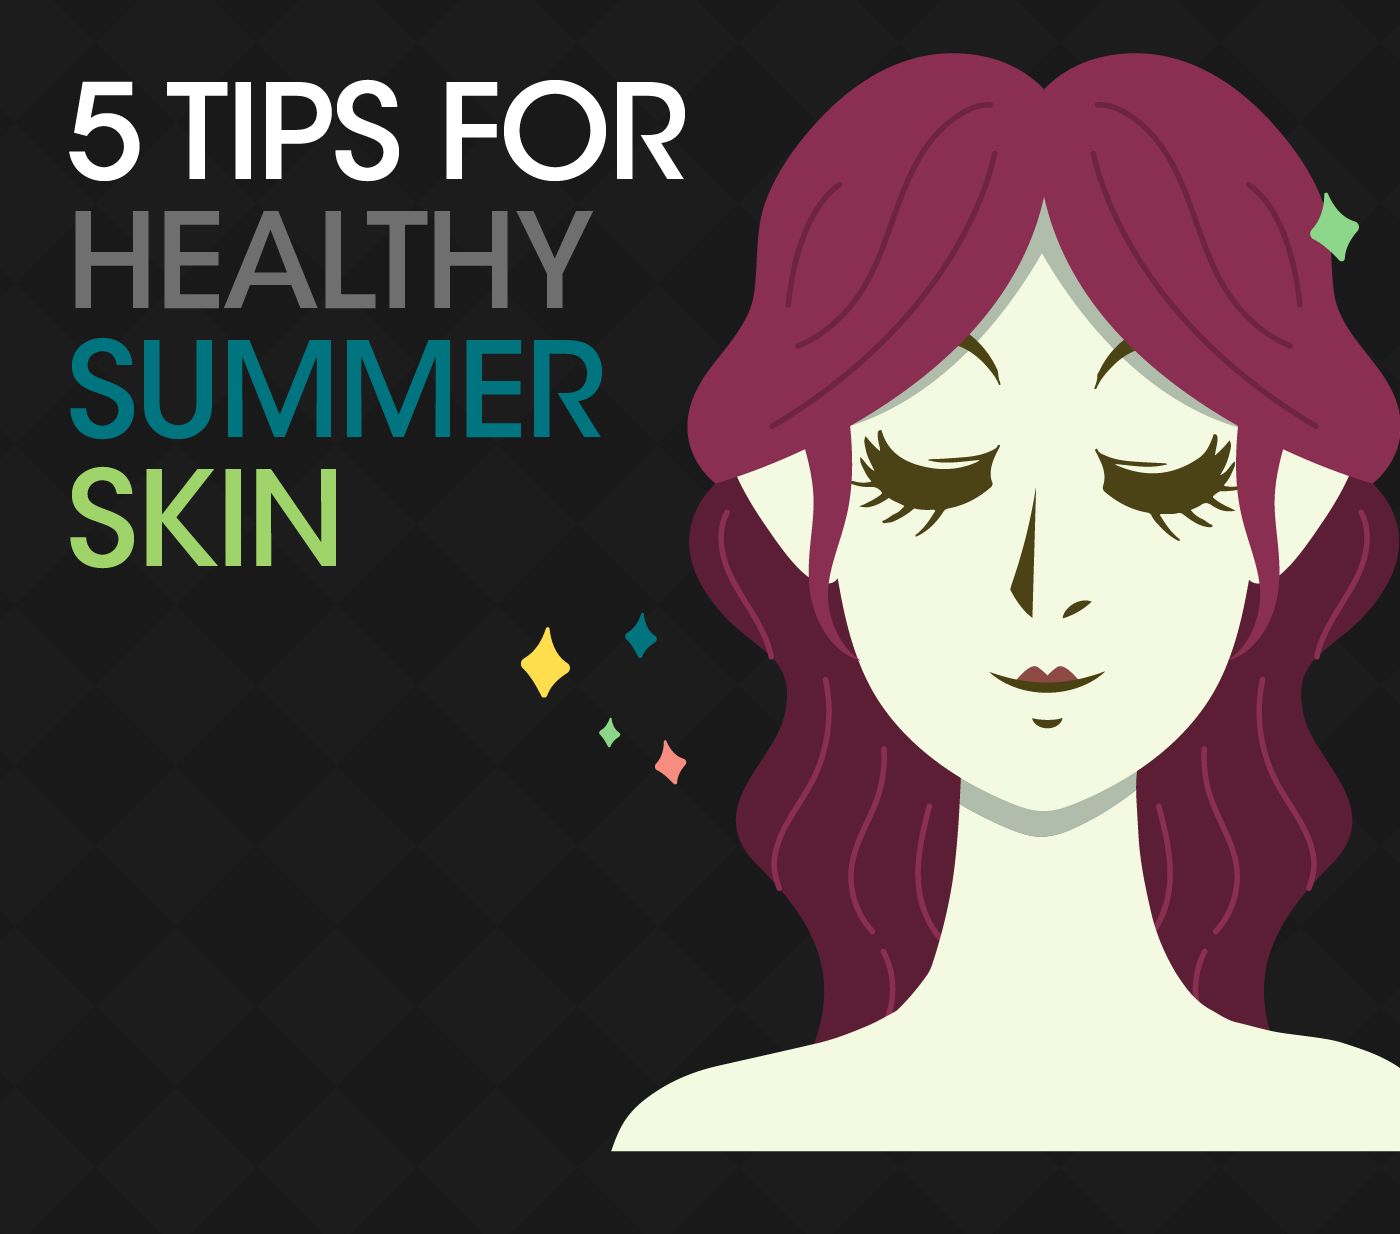 Tips for Healthy Summer Skin